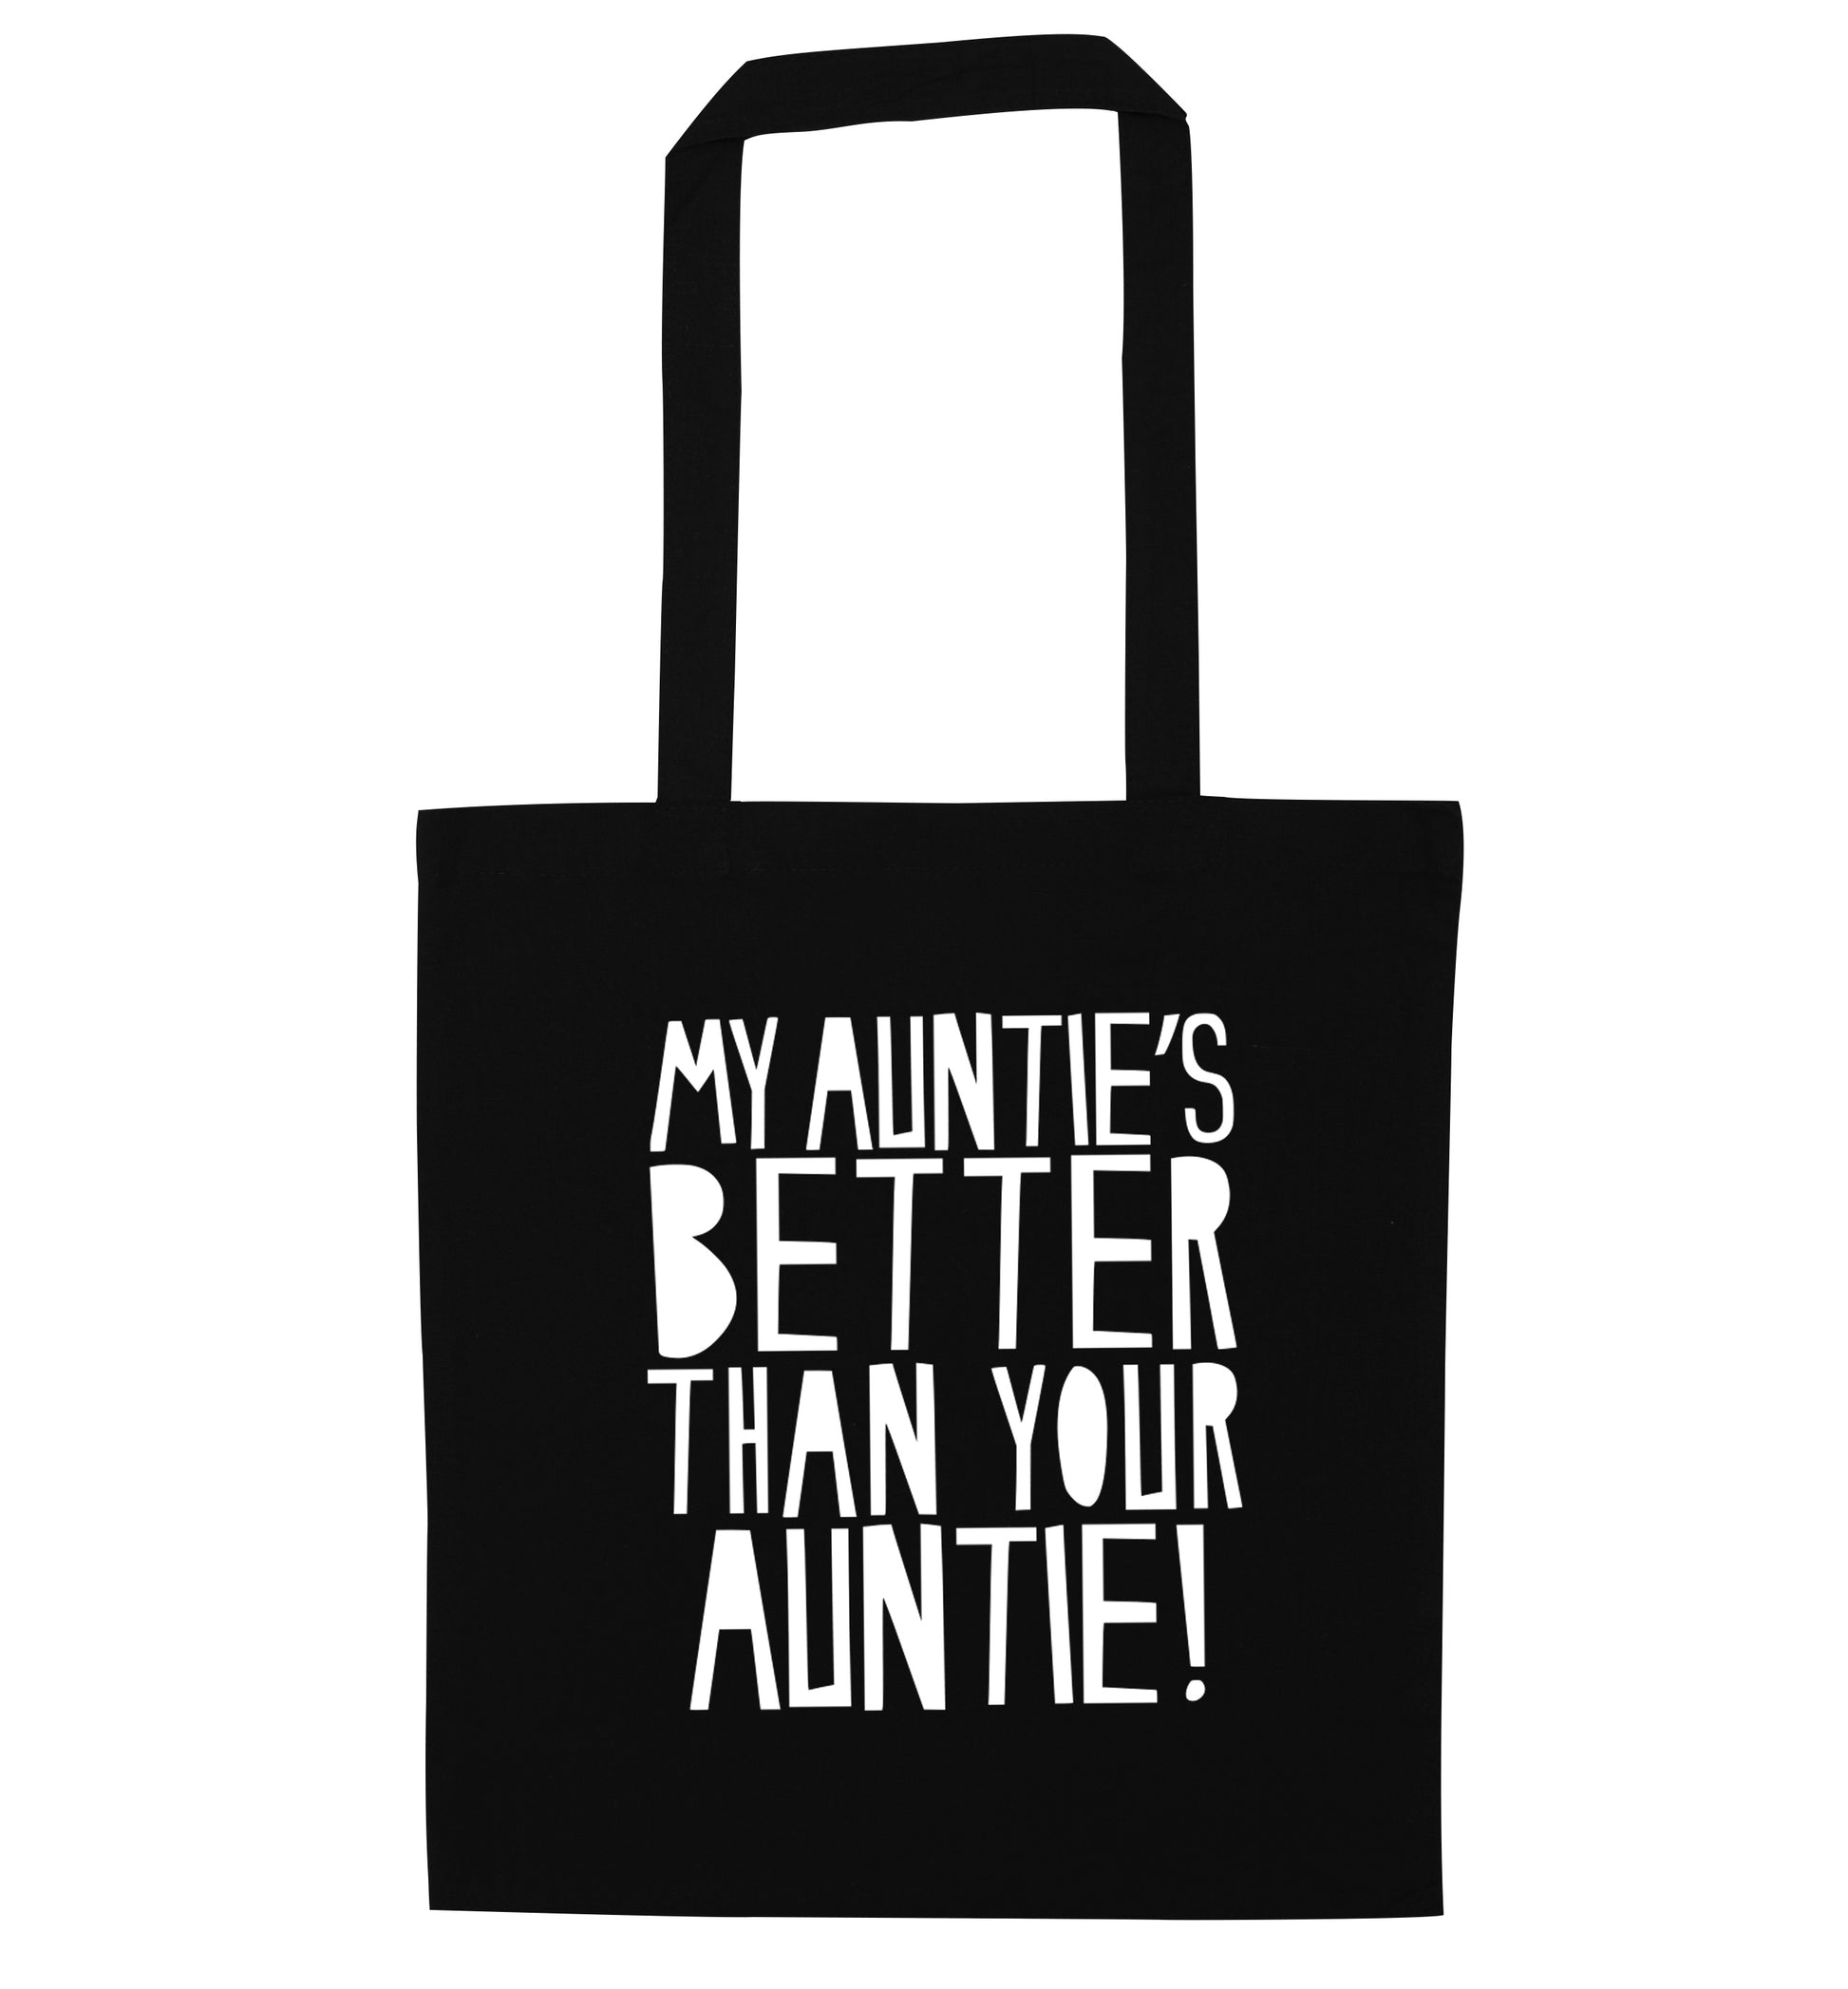 My auntie's better than your auntie black tote bag